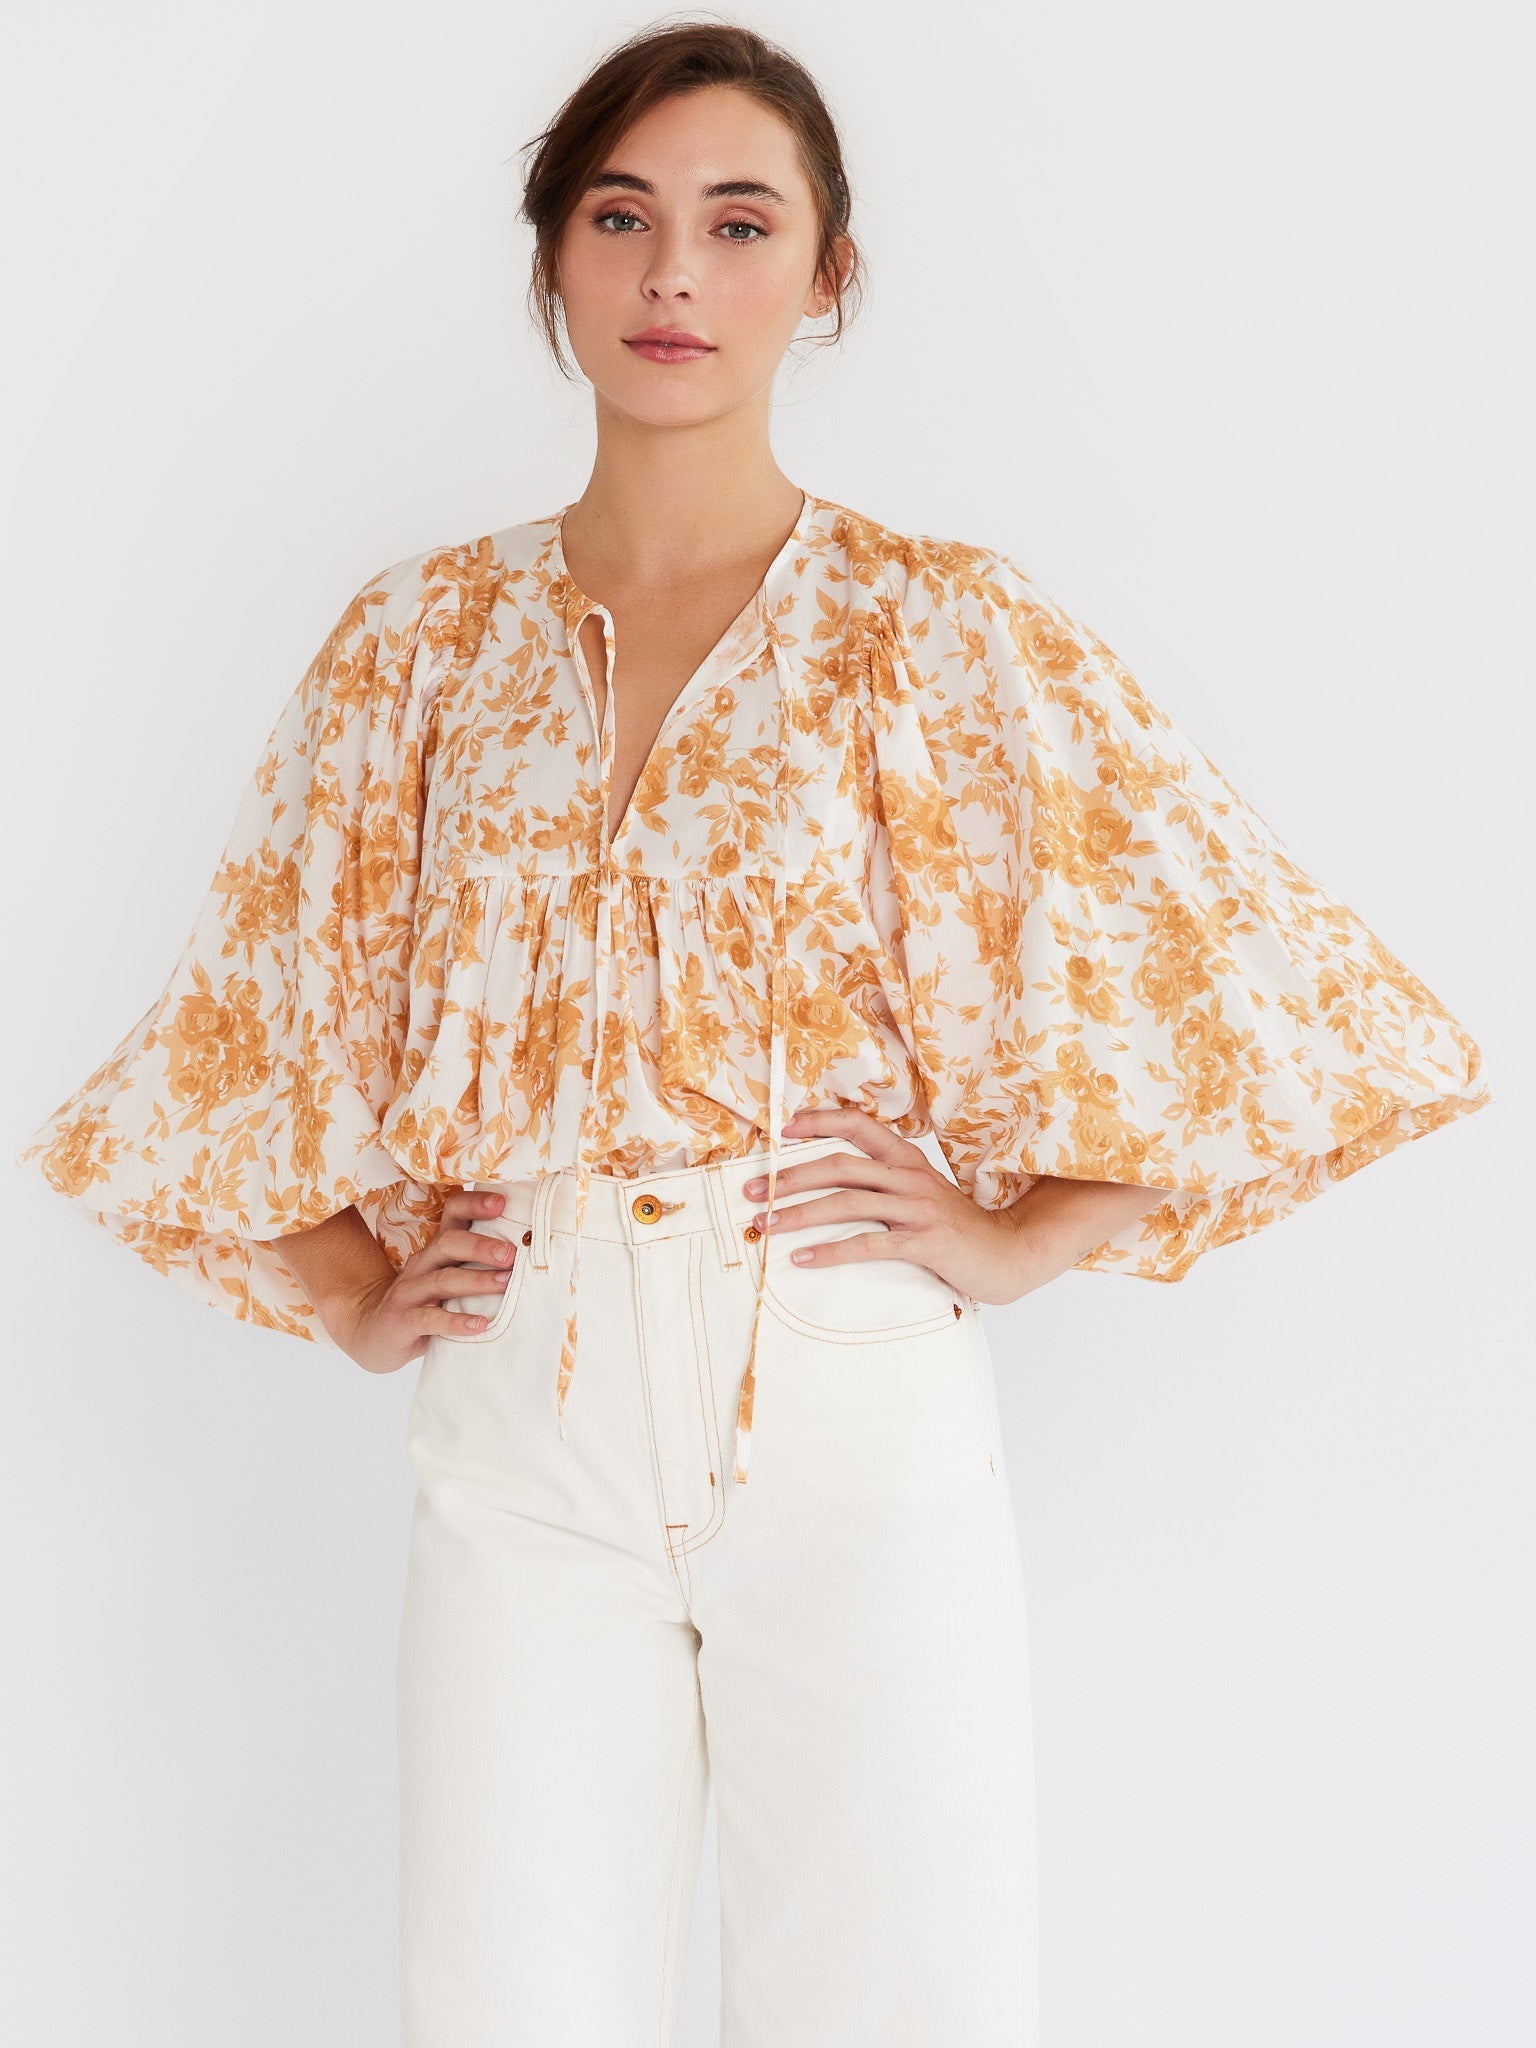 MILLE Clothing Charlie Top in Buttercup